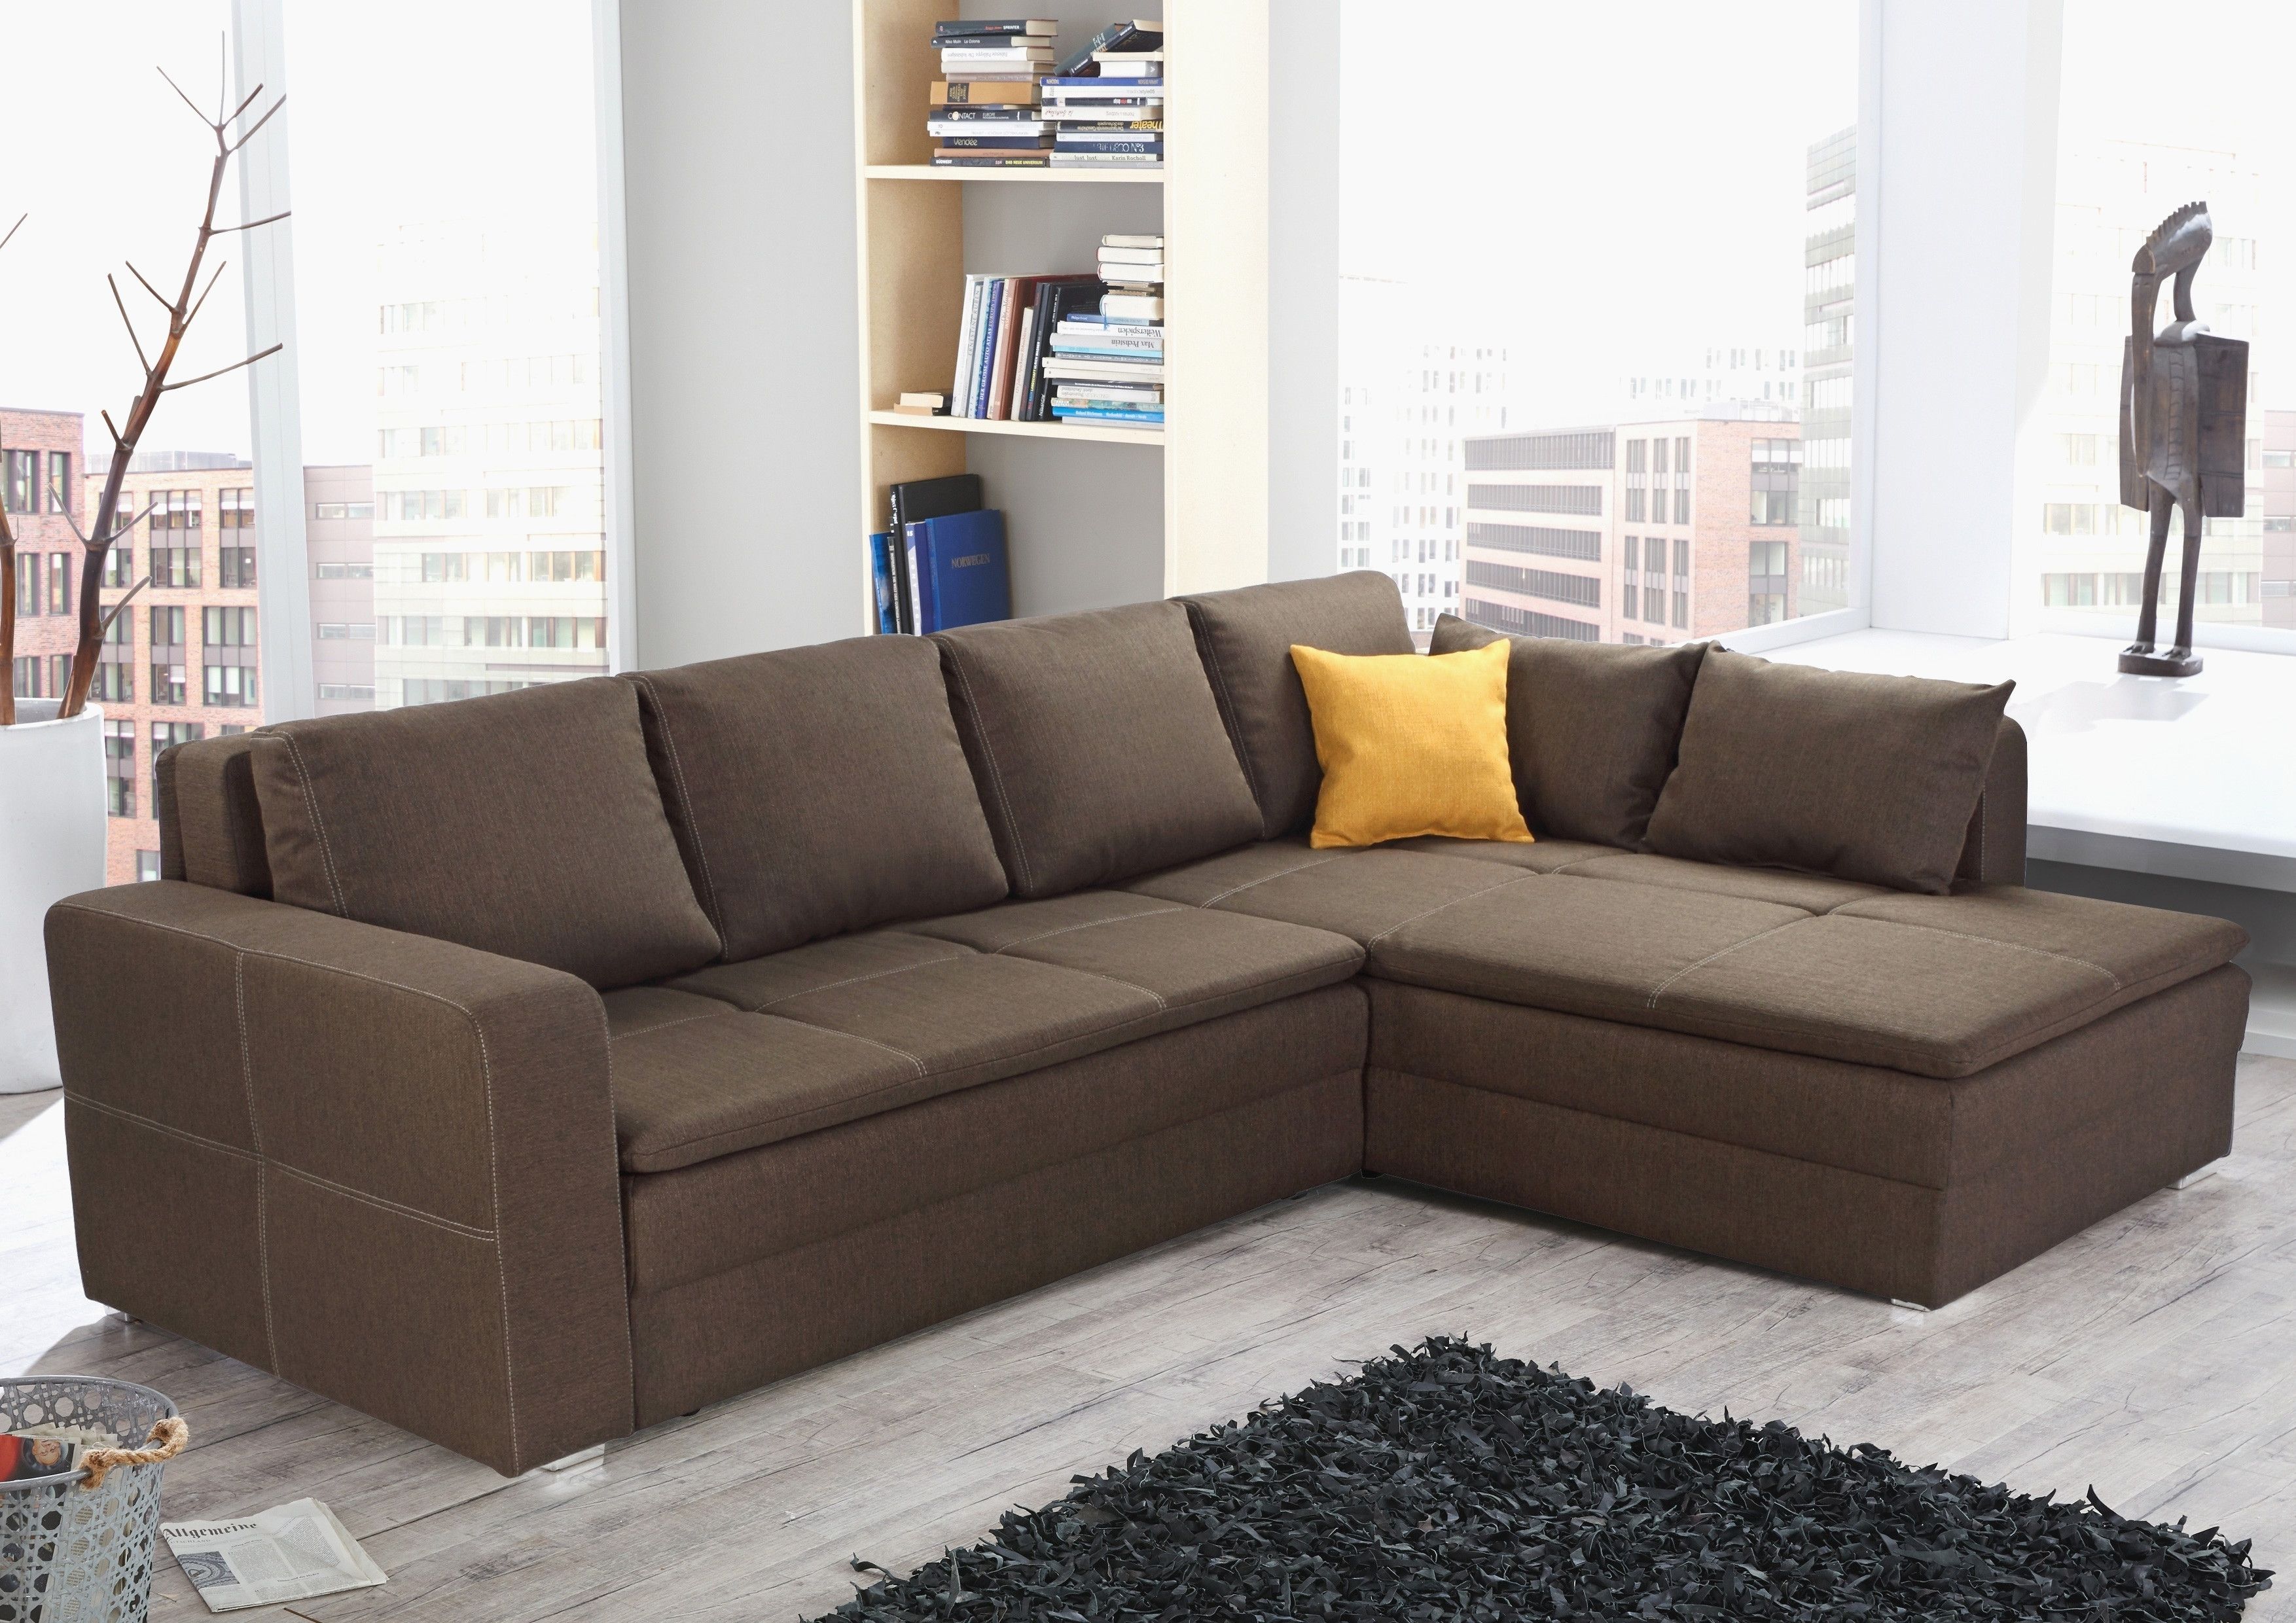 60 Awesome Sectional Sleeper Sofa With Chaise Collection 6y7k – Home Inside Arrowmask 2 Piece Sectionals With Sleeper & Right Facing Chaise (View 26 of 30)